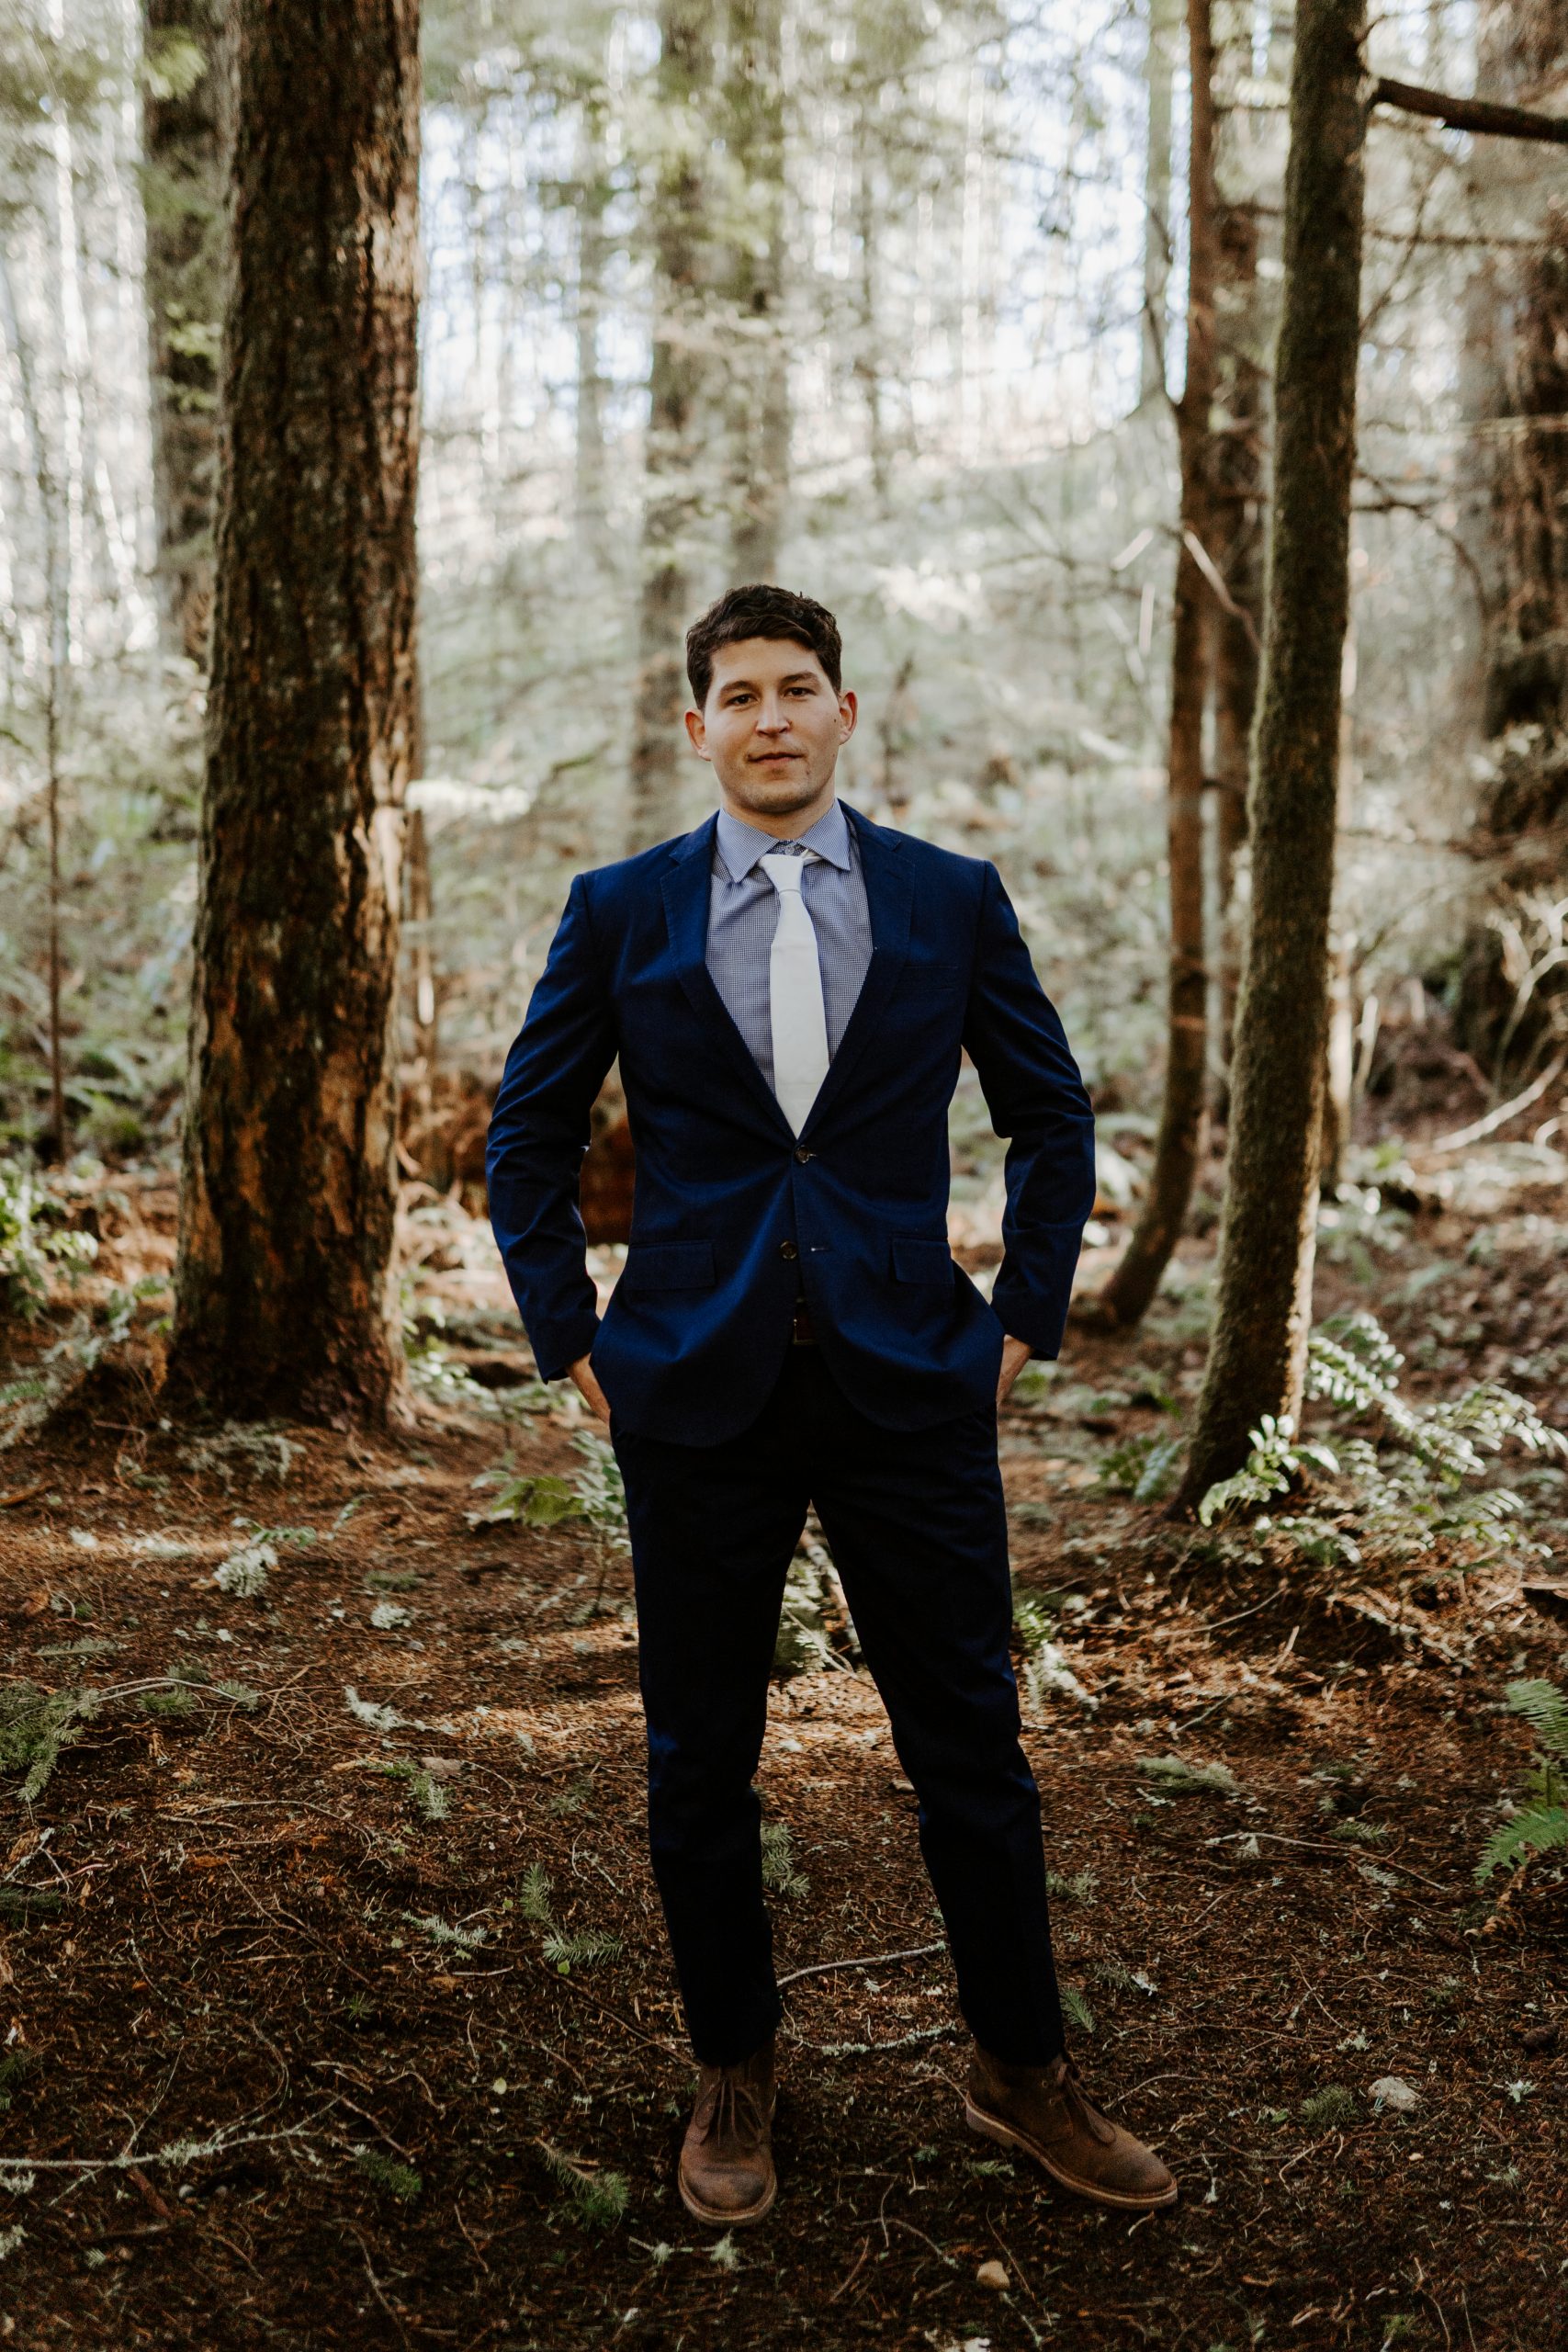 Groom with a navy suit standing in the forest